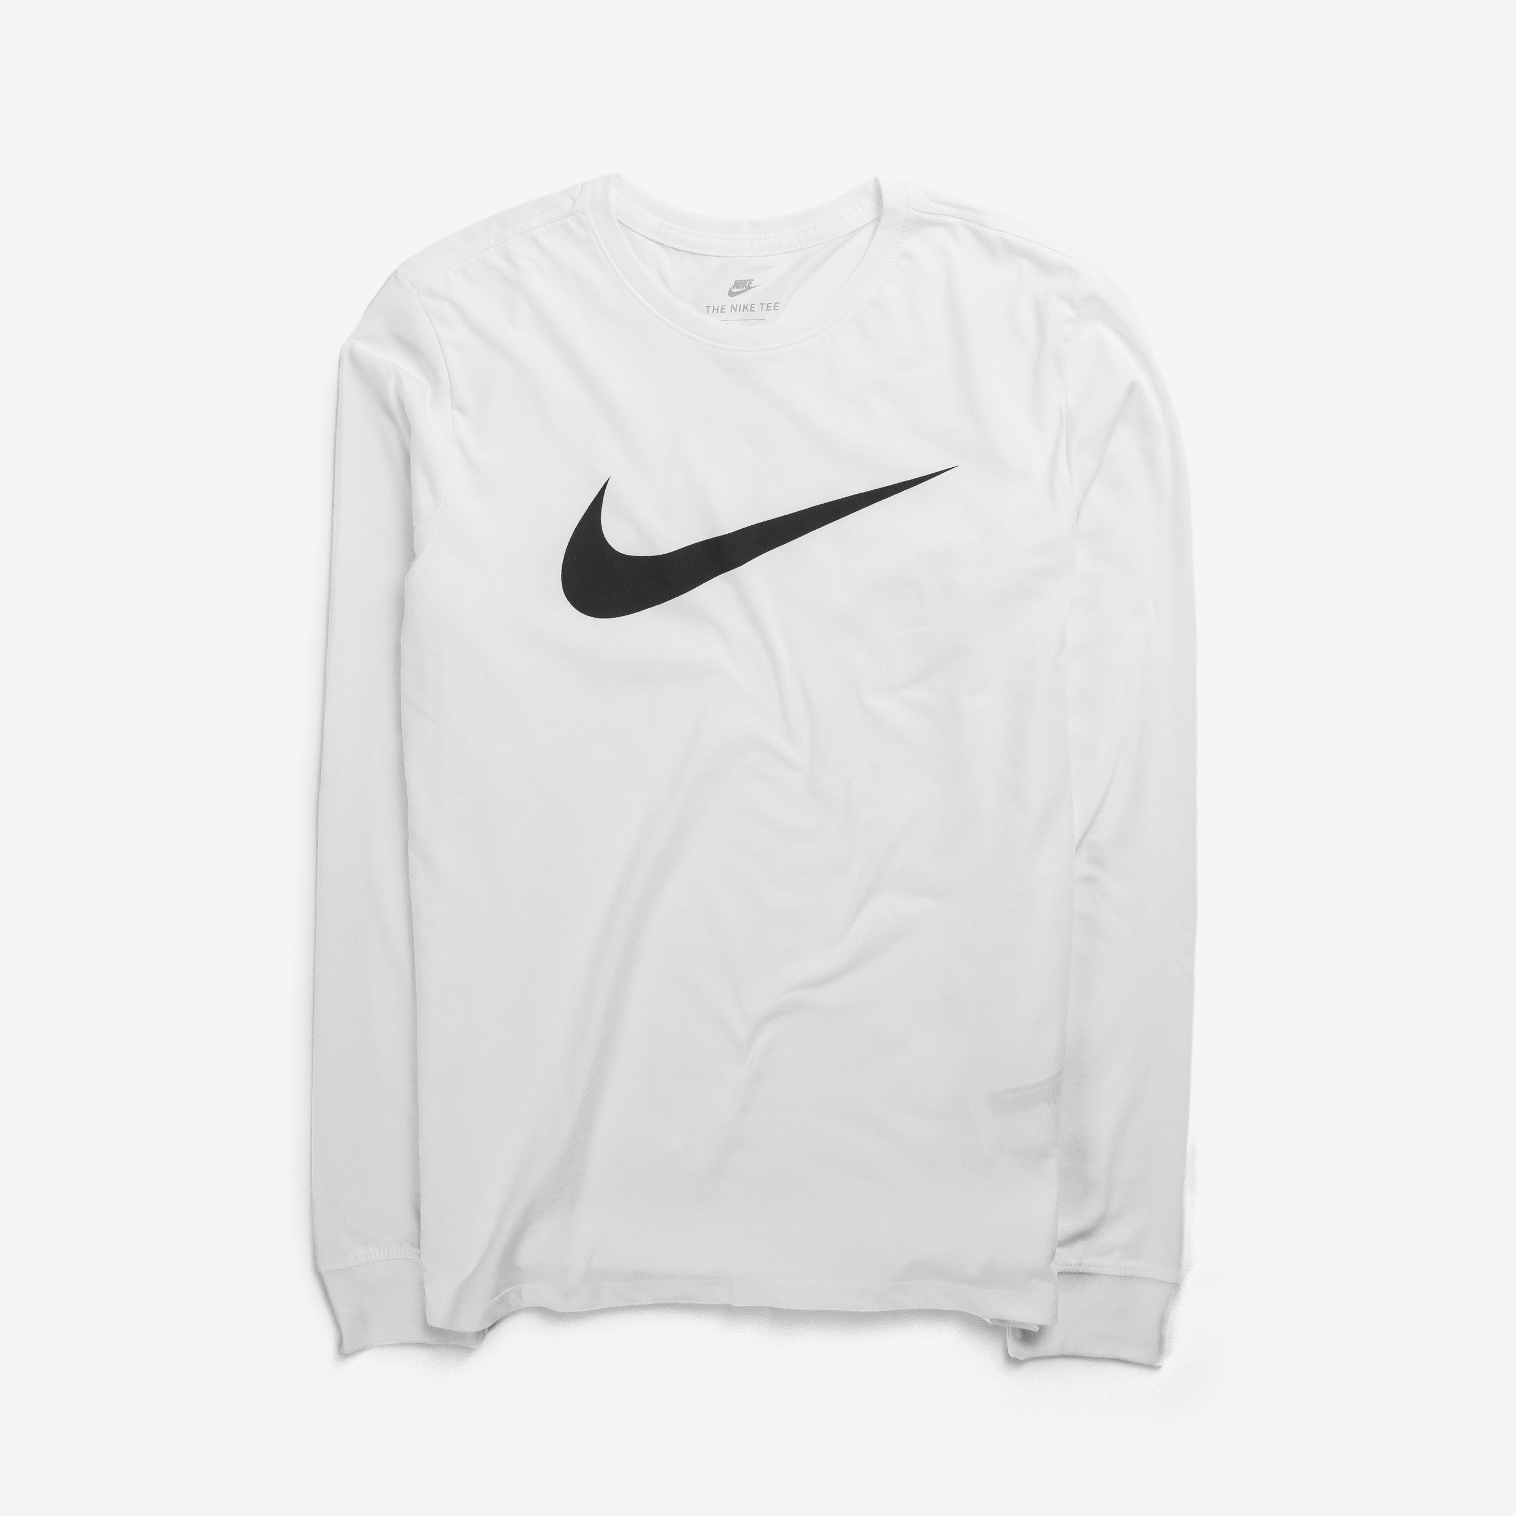 Nike Swoosh Icon at Vectorified.com | Collection of Nike Swoosh Icon ...